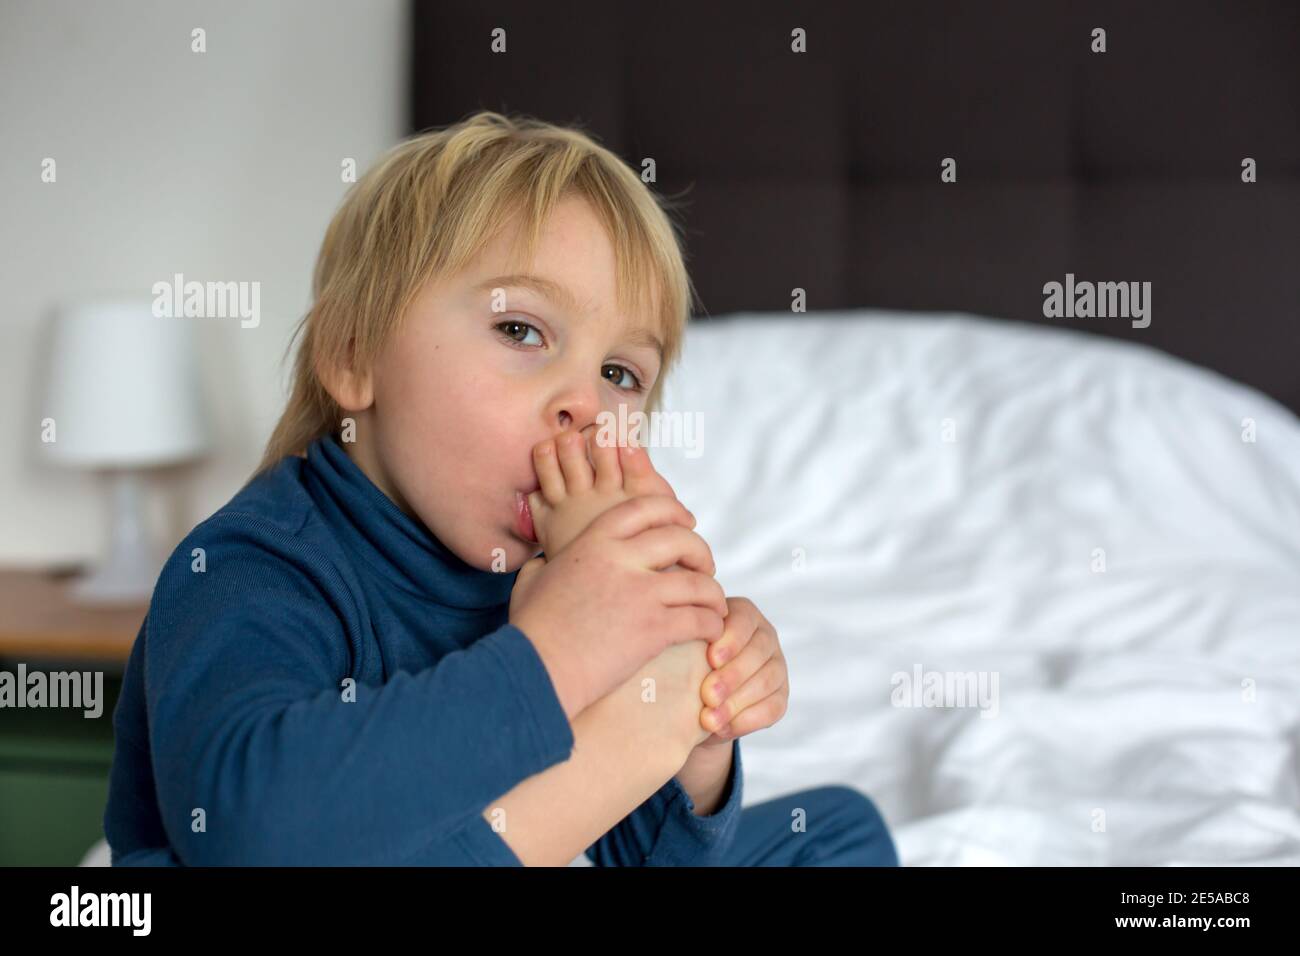 Cute blond toddler child, sucking his foot thumb, making funny faces, laughing Stock Photo